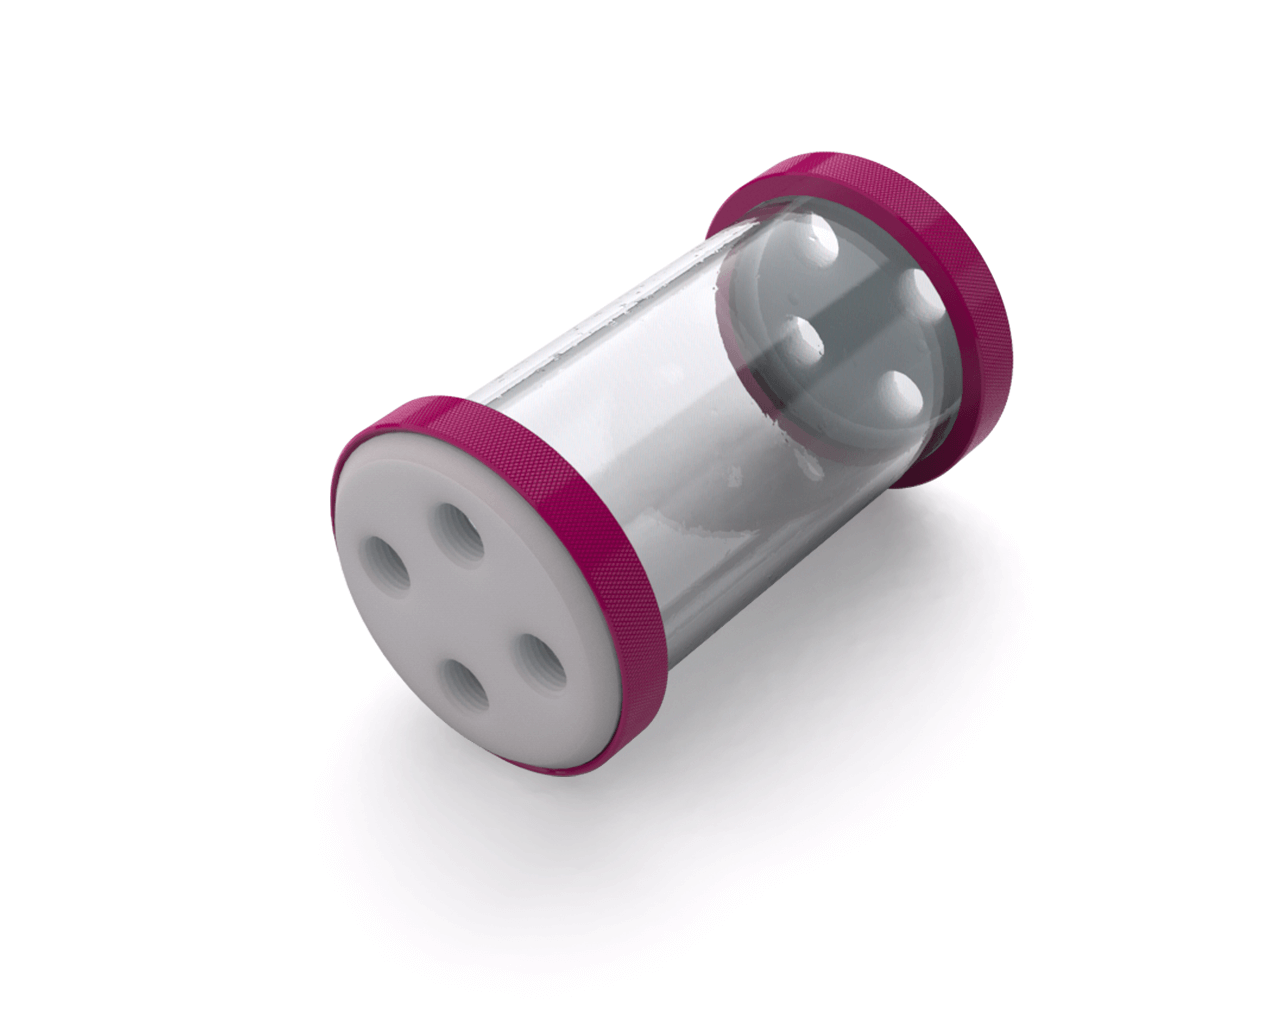 PrimoChill CTR Low Profile Phase II Reservoir - White POM - 120mm - PrimoChill - KEEPING IT COOL Magenta